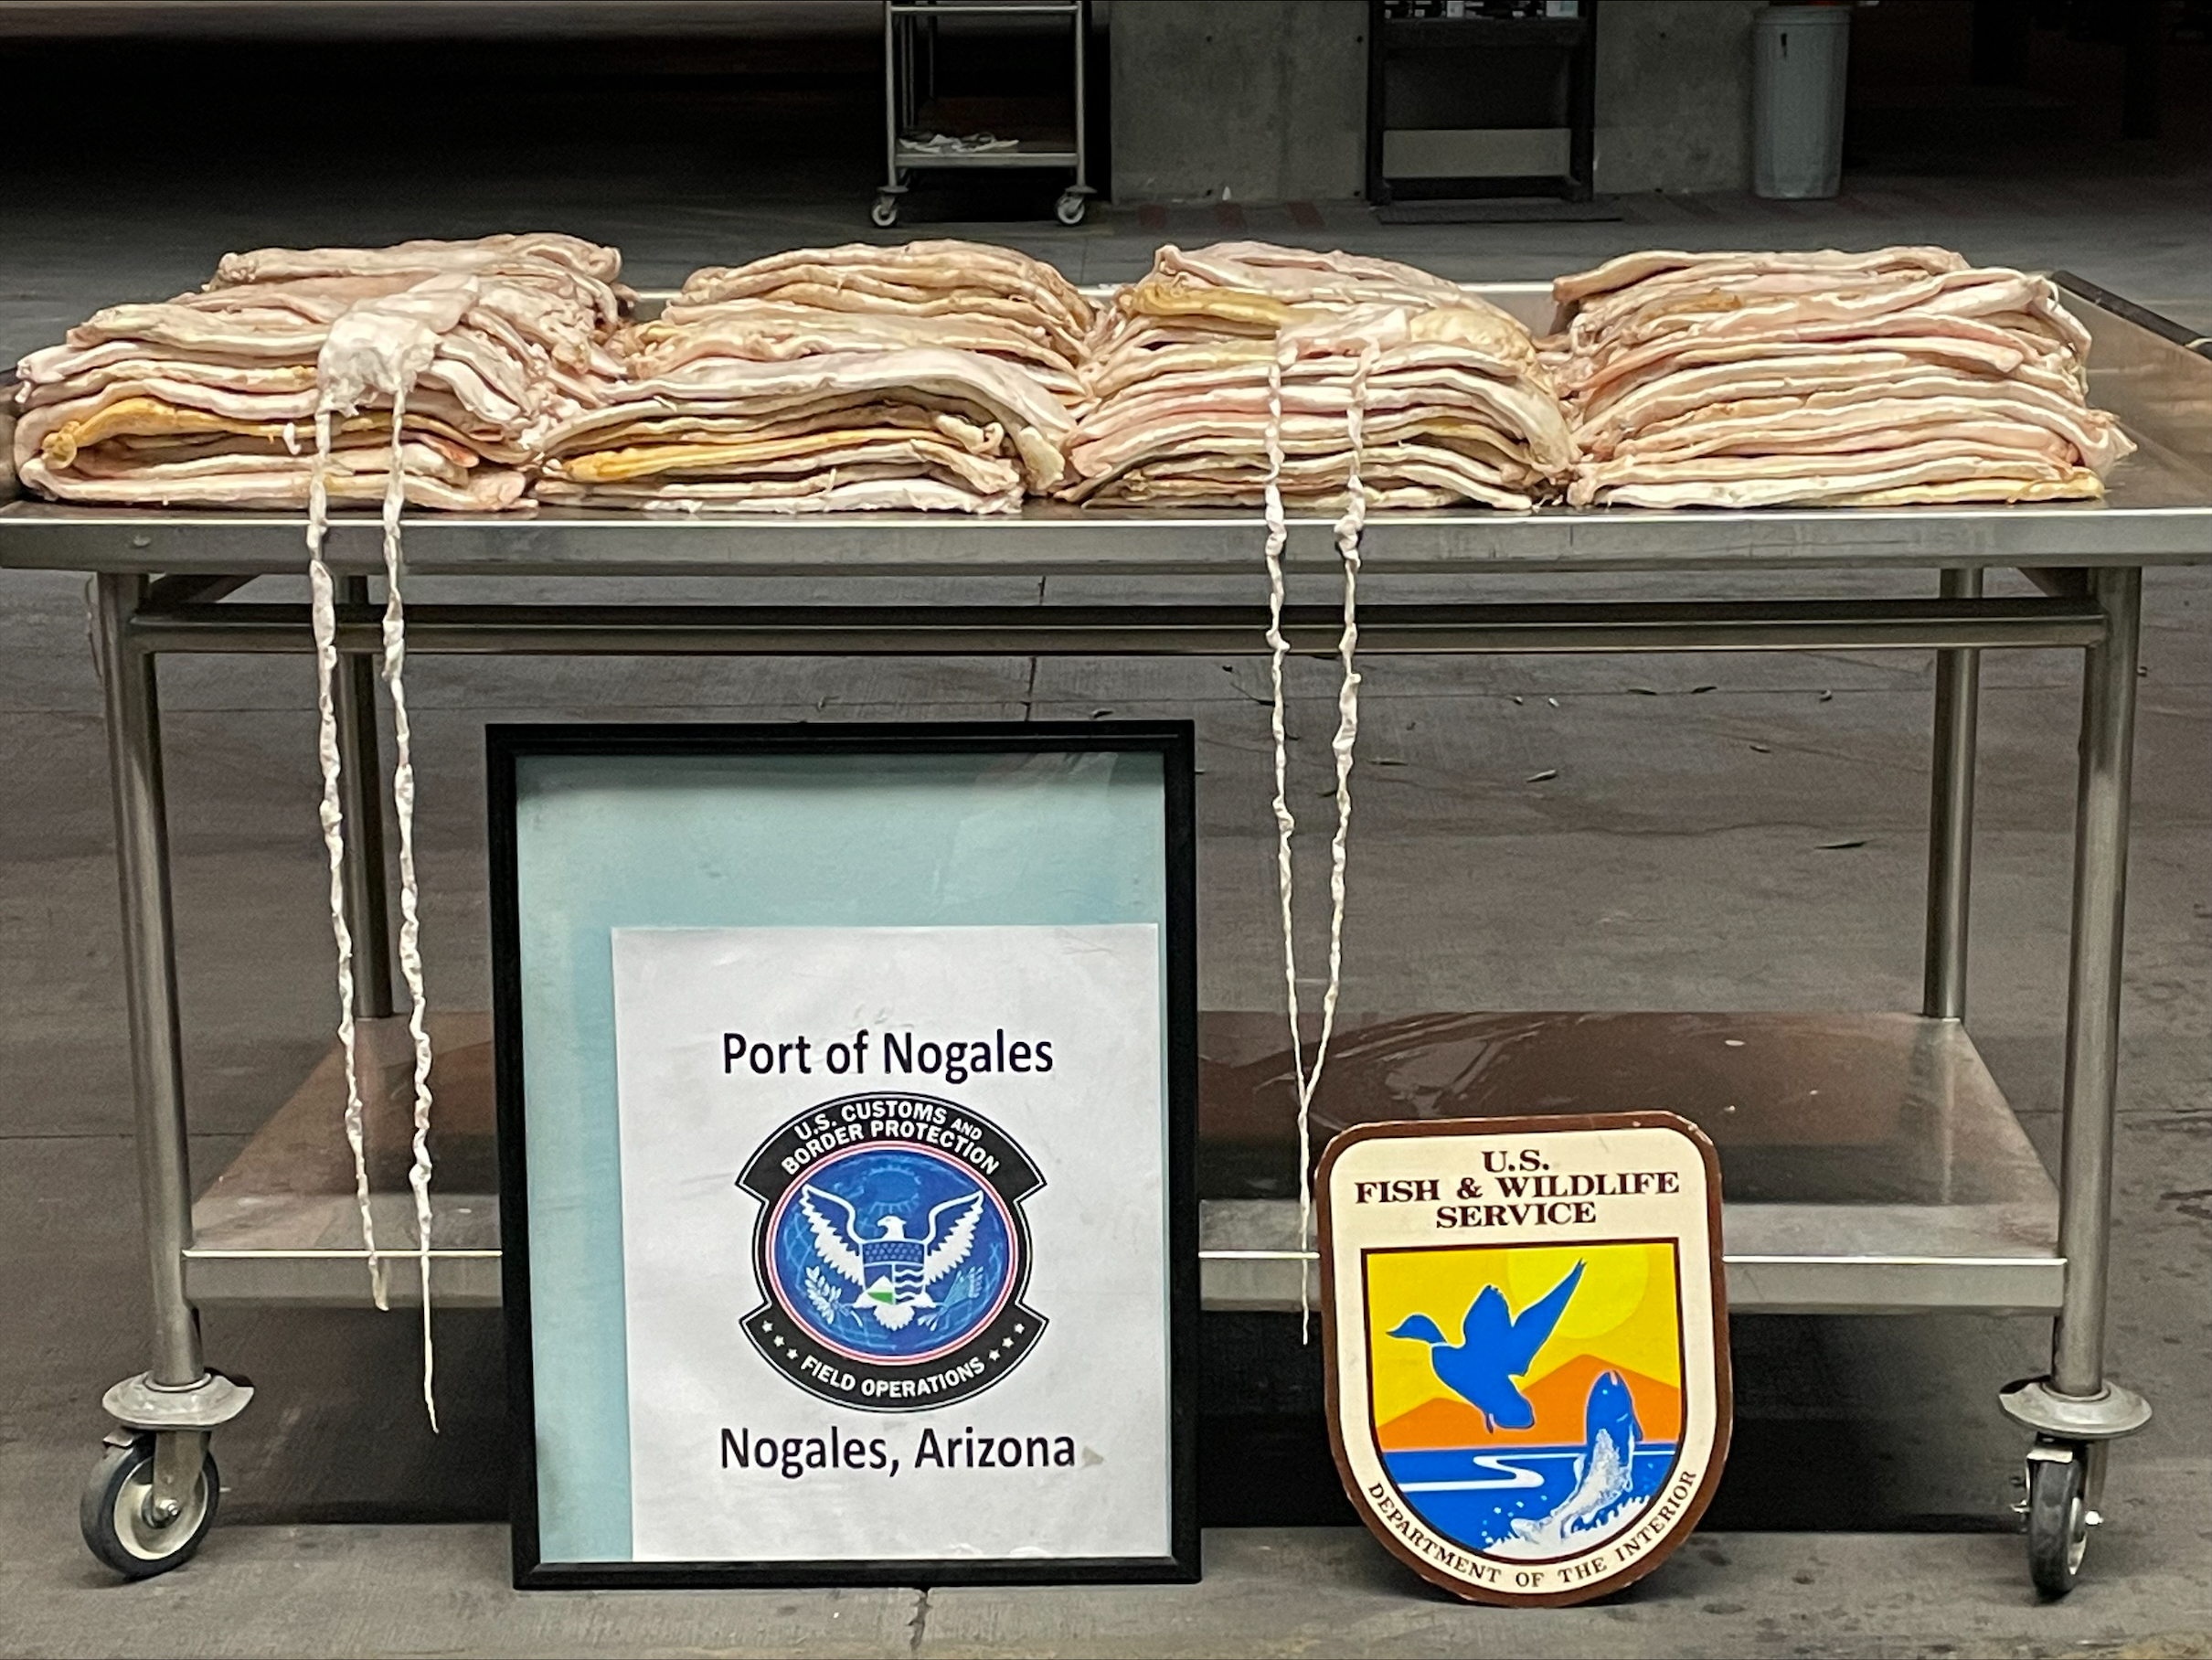 CBP officers in Nogales, Ariz.  discovered 270 swim bladders of the endangered Totoaba fish which were concealed within a commercial shipment of frozen fish fillets.